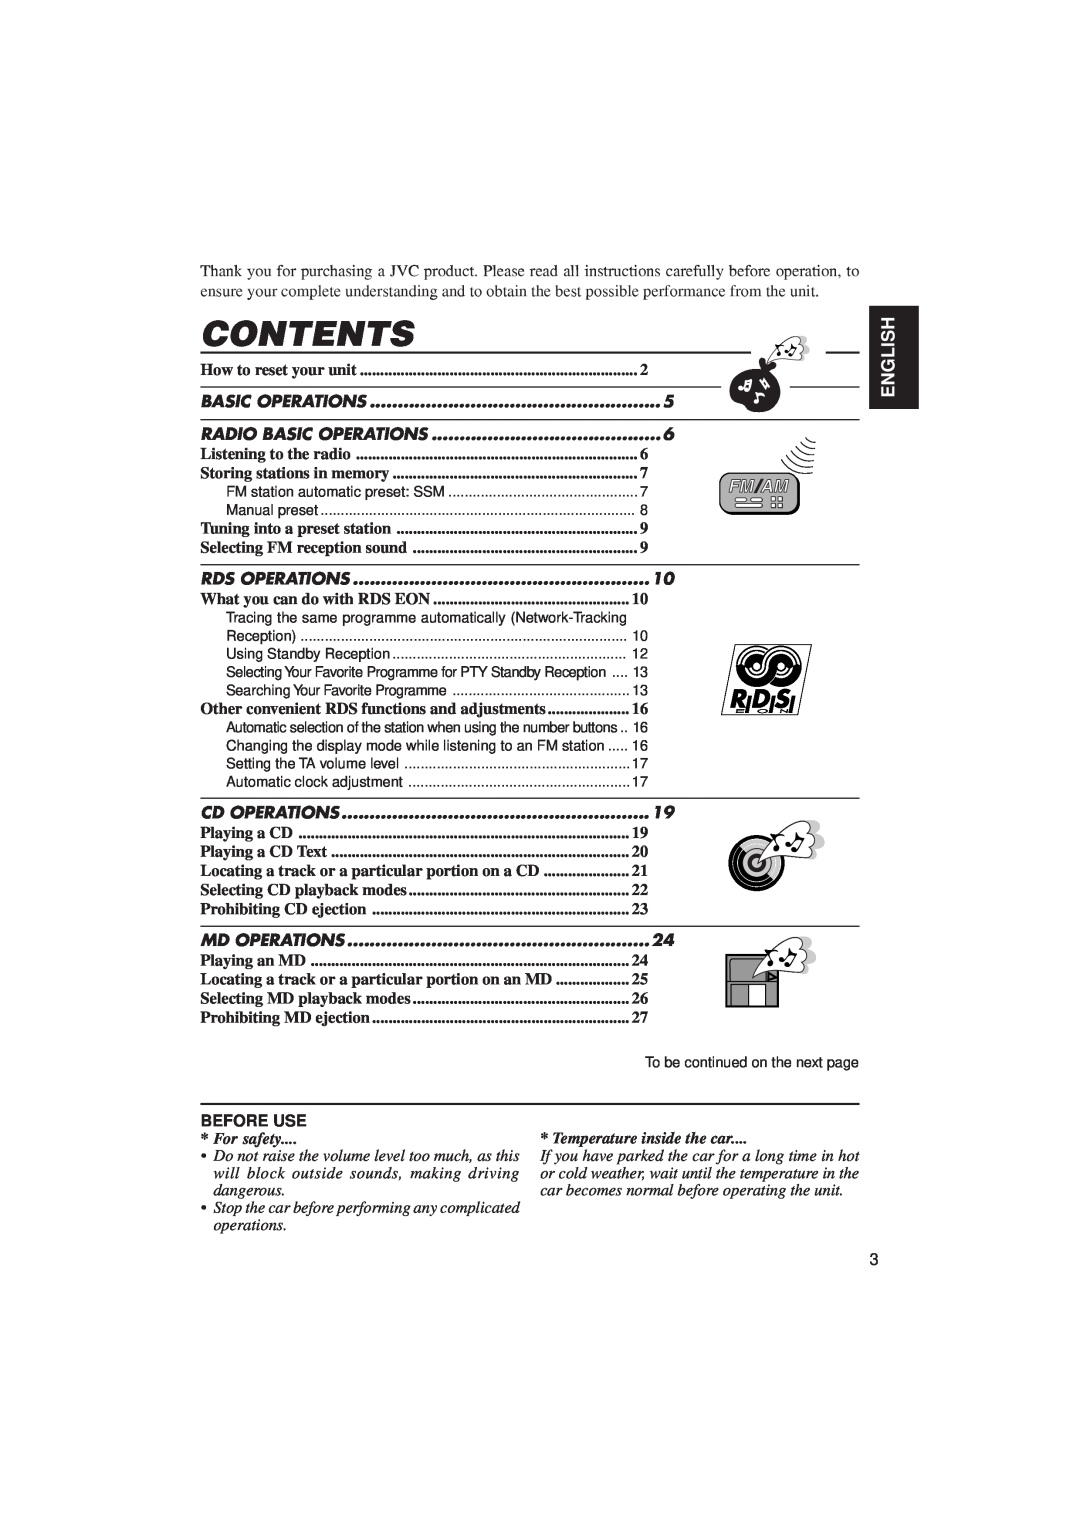 JVC KD-MX2900R manual Contents, English, Before Use, For safety, Temperature inside the car, dangerous 